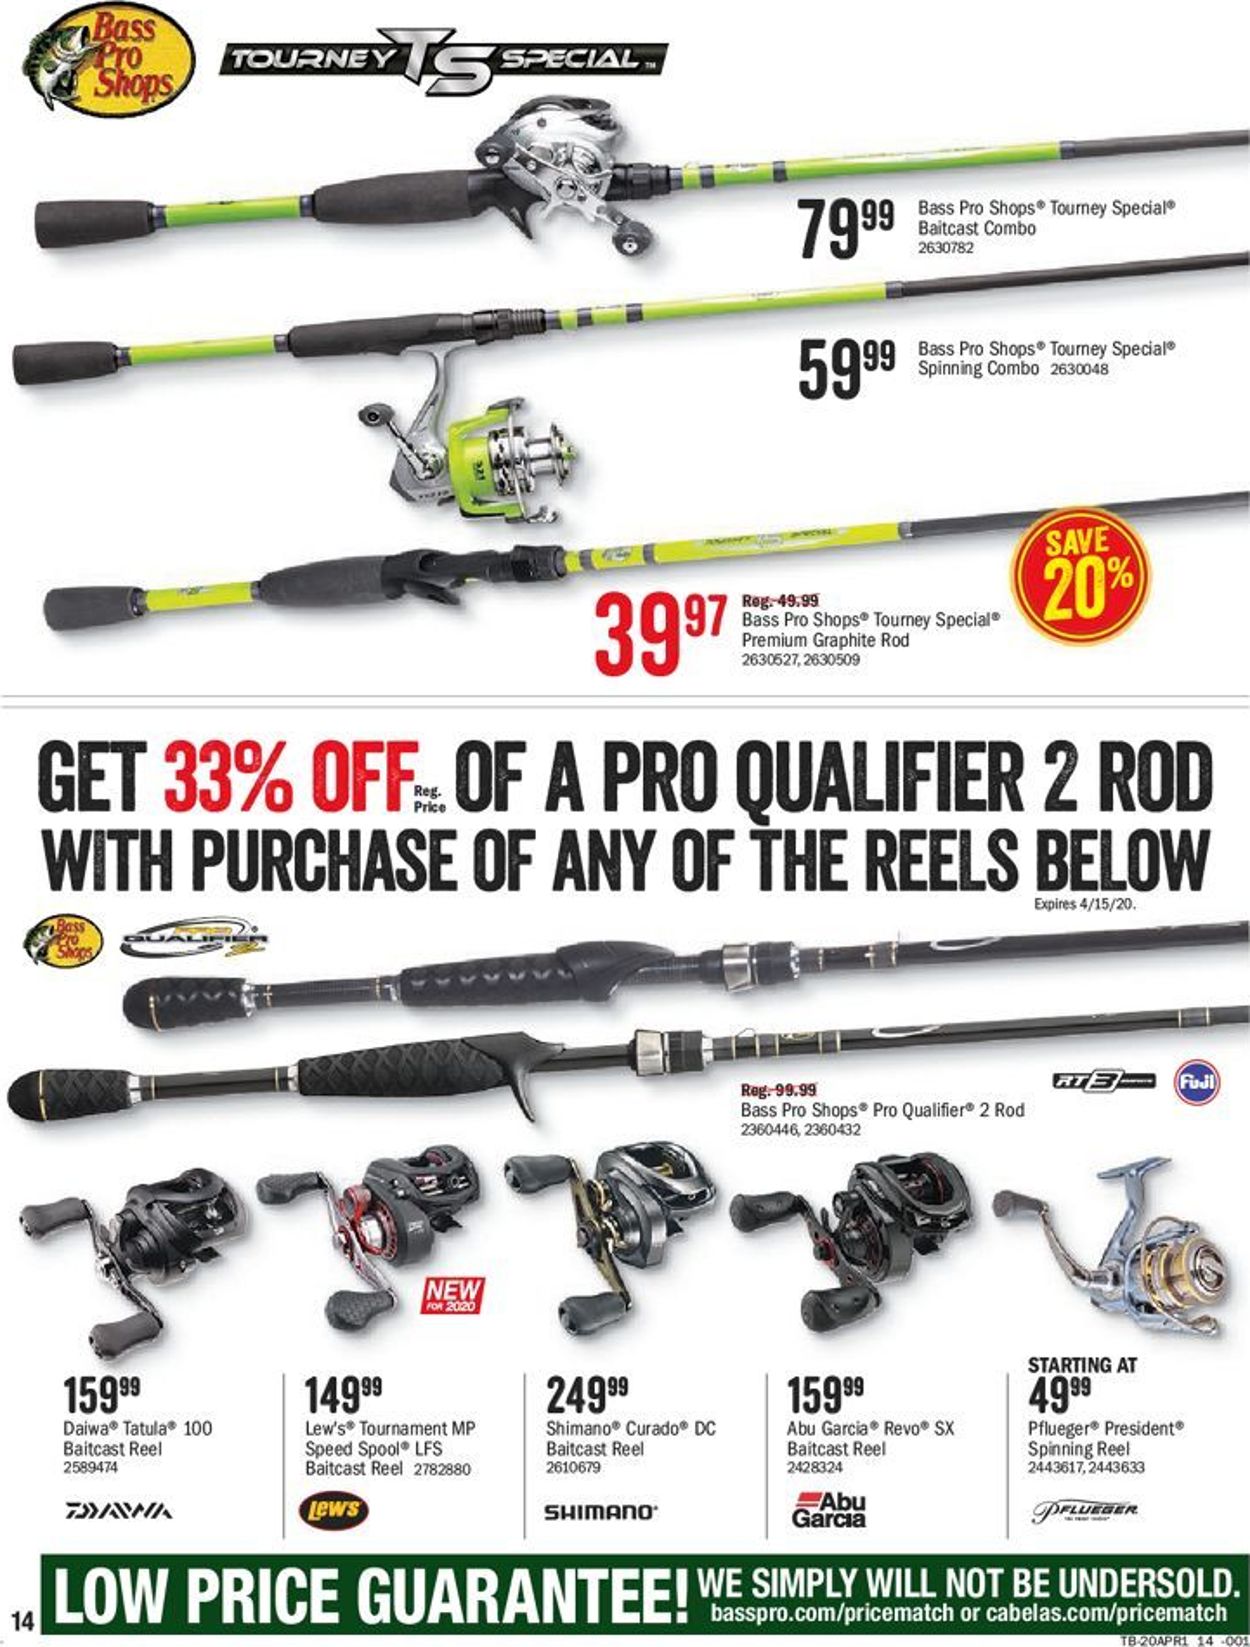 Tourney Special Spinning Rod 2024